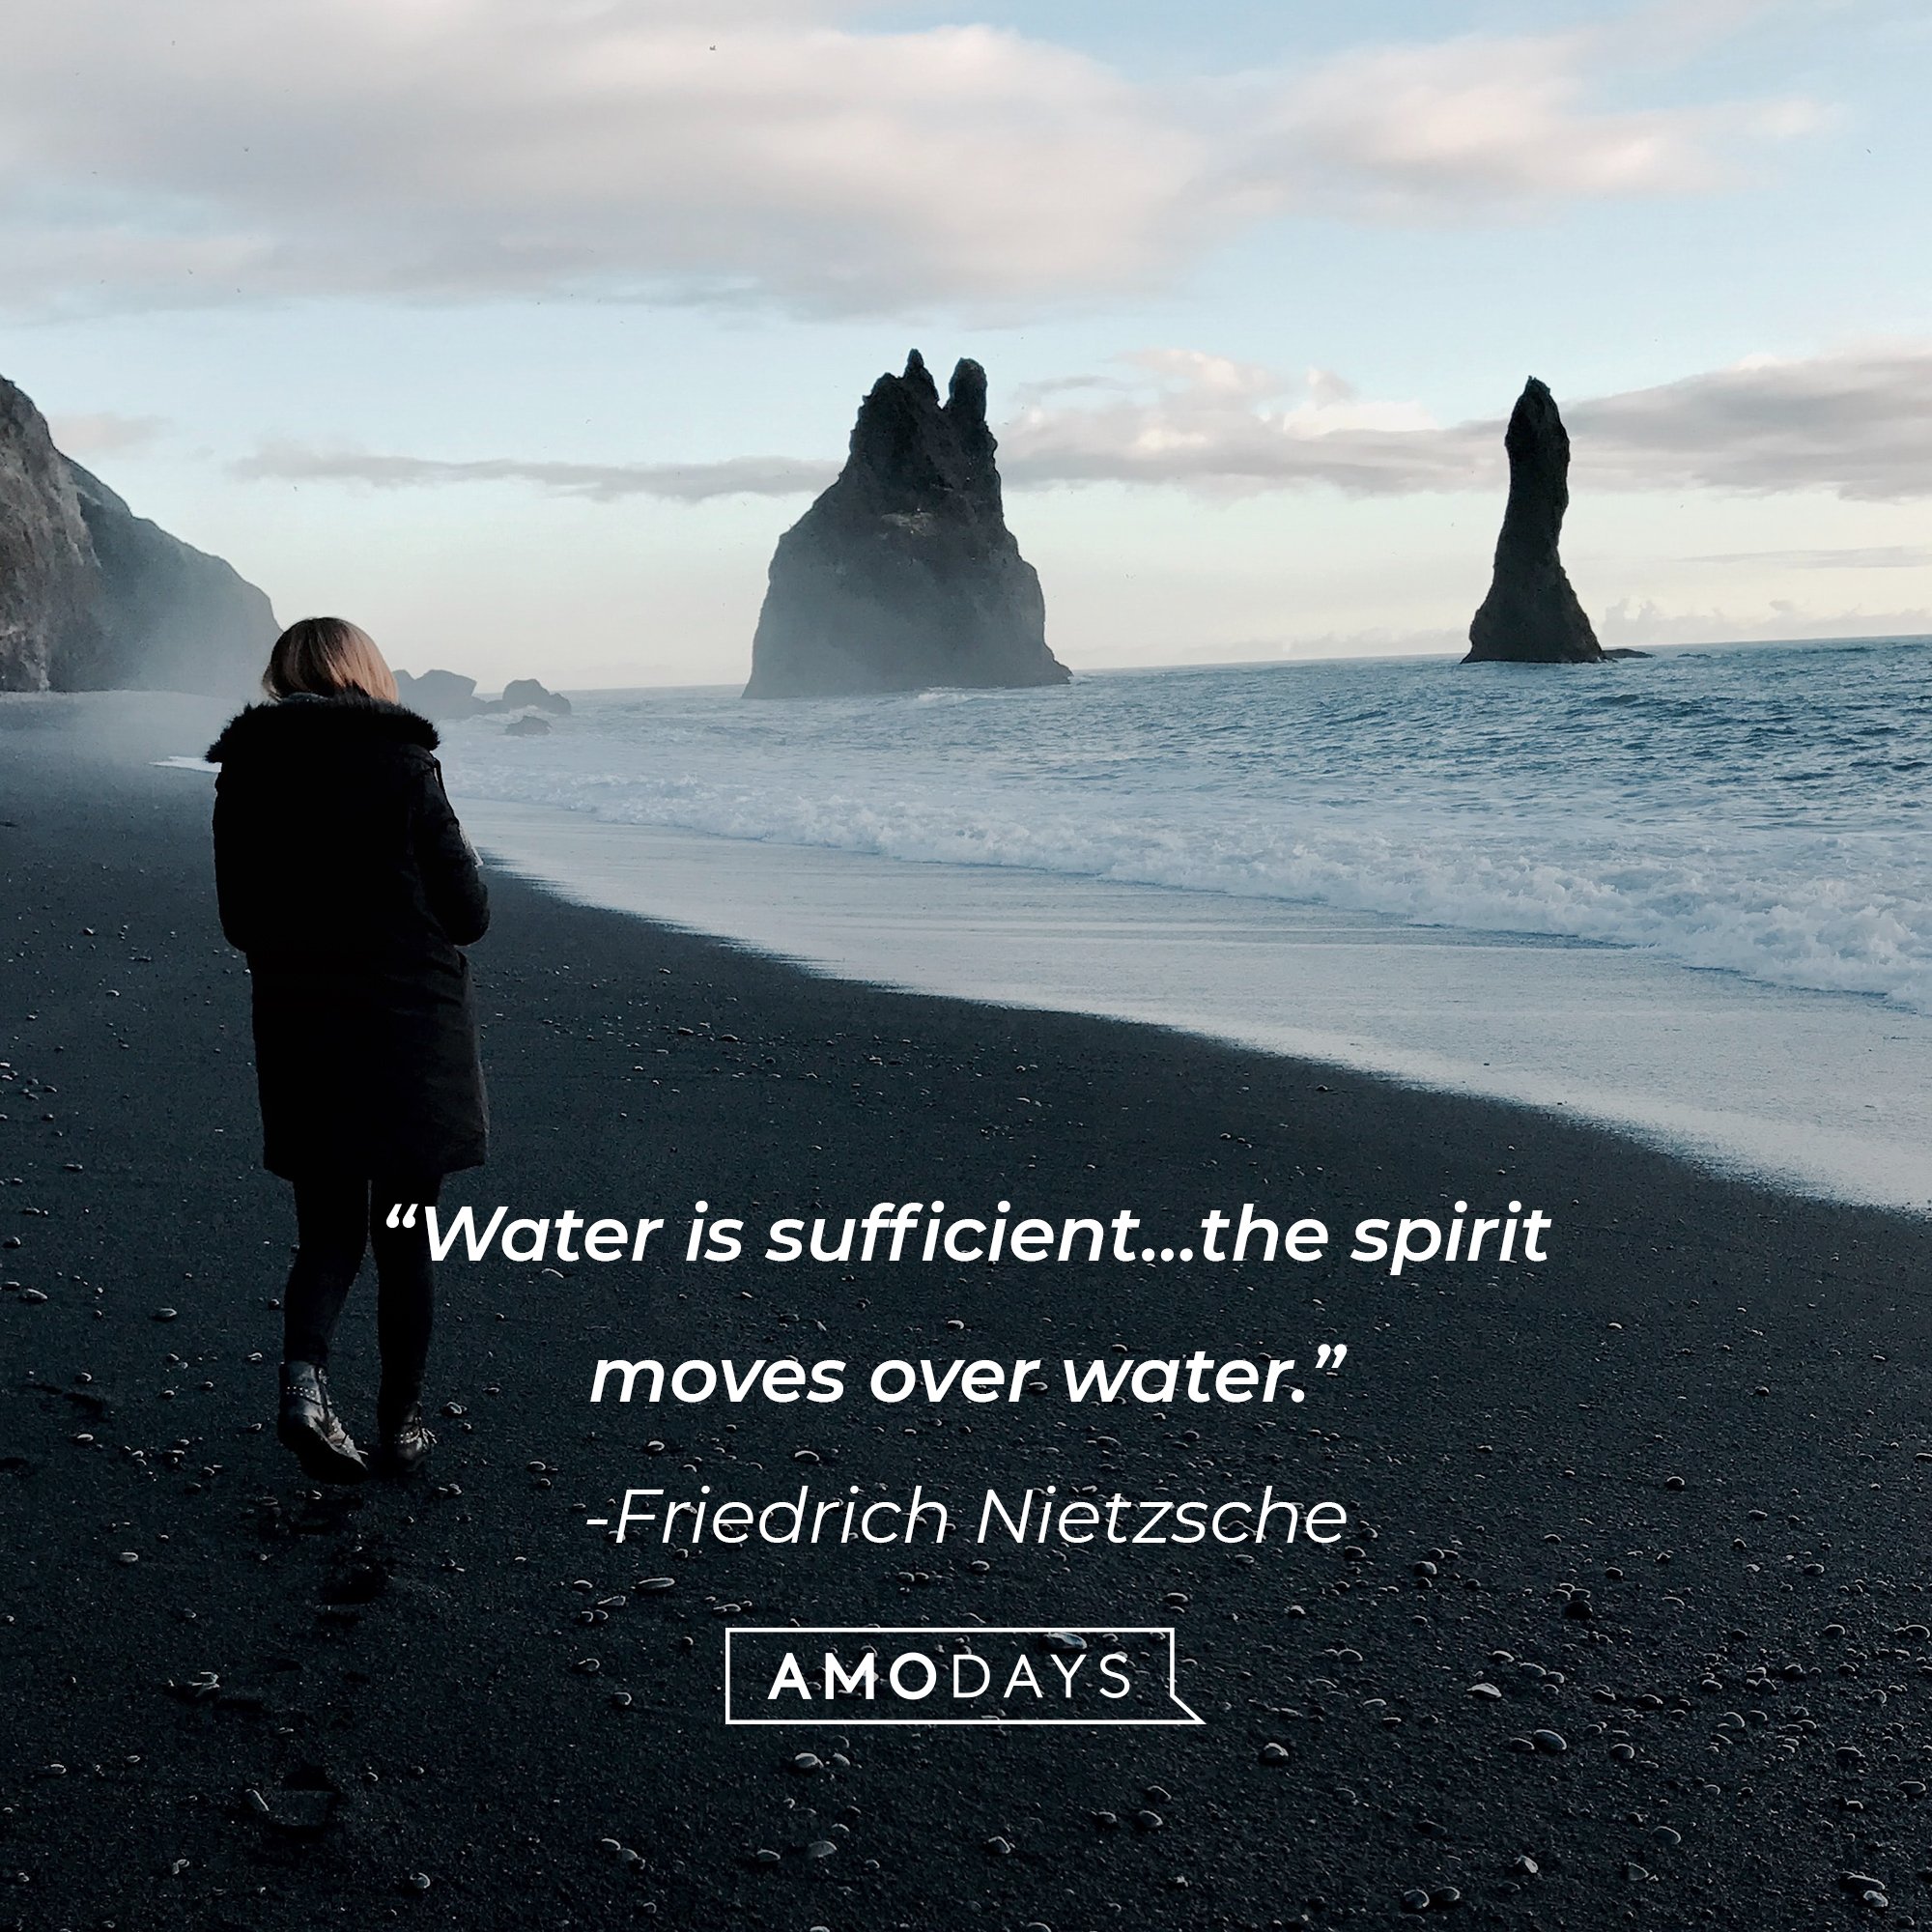 Friedrich Nietzsche’s quote: “Water is sufficient…the spirit moves over water.” | Image: AmoDays